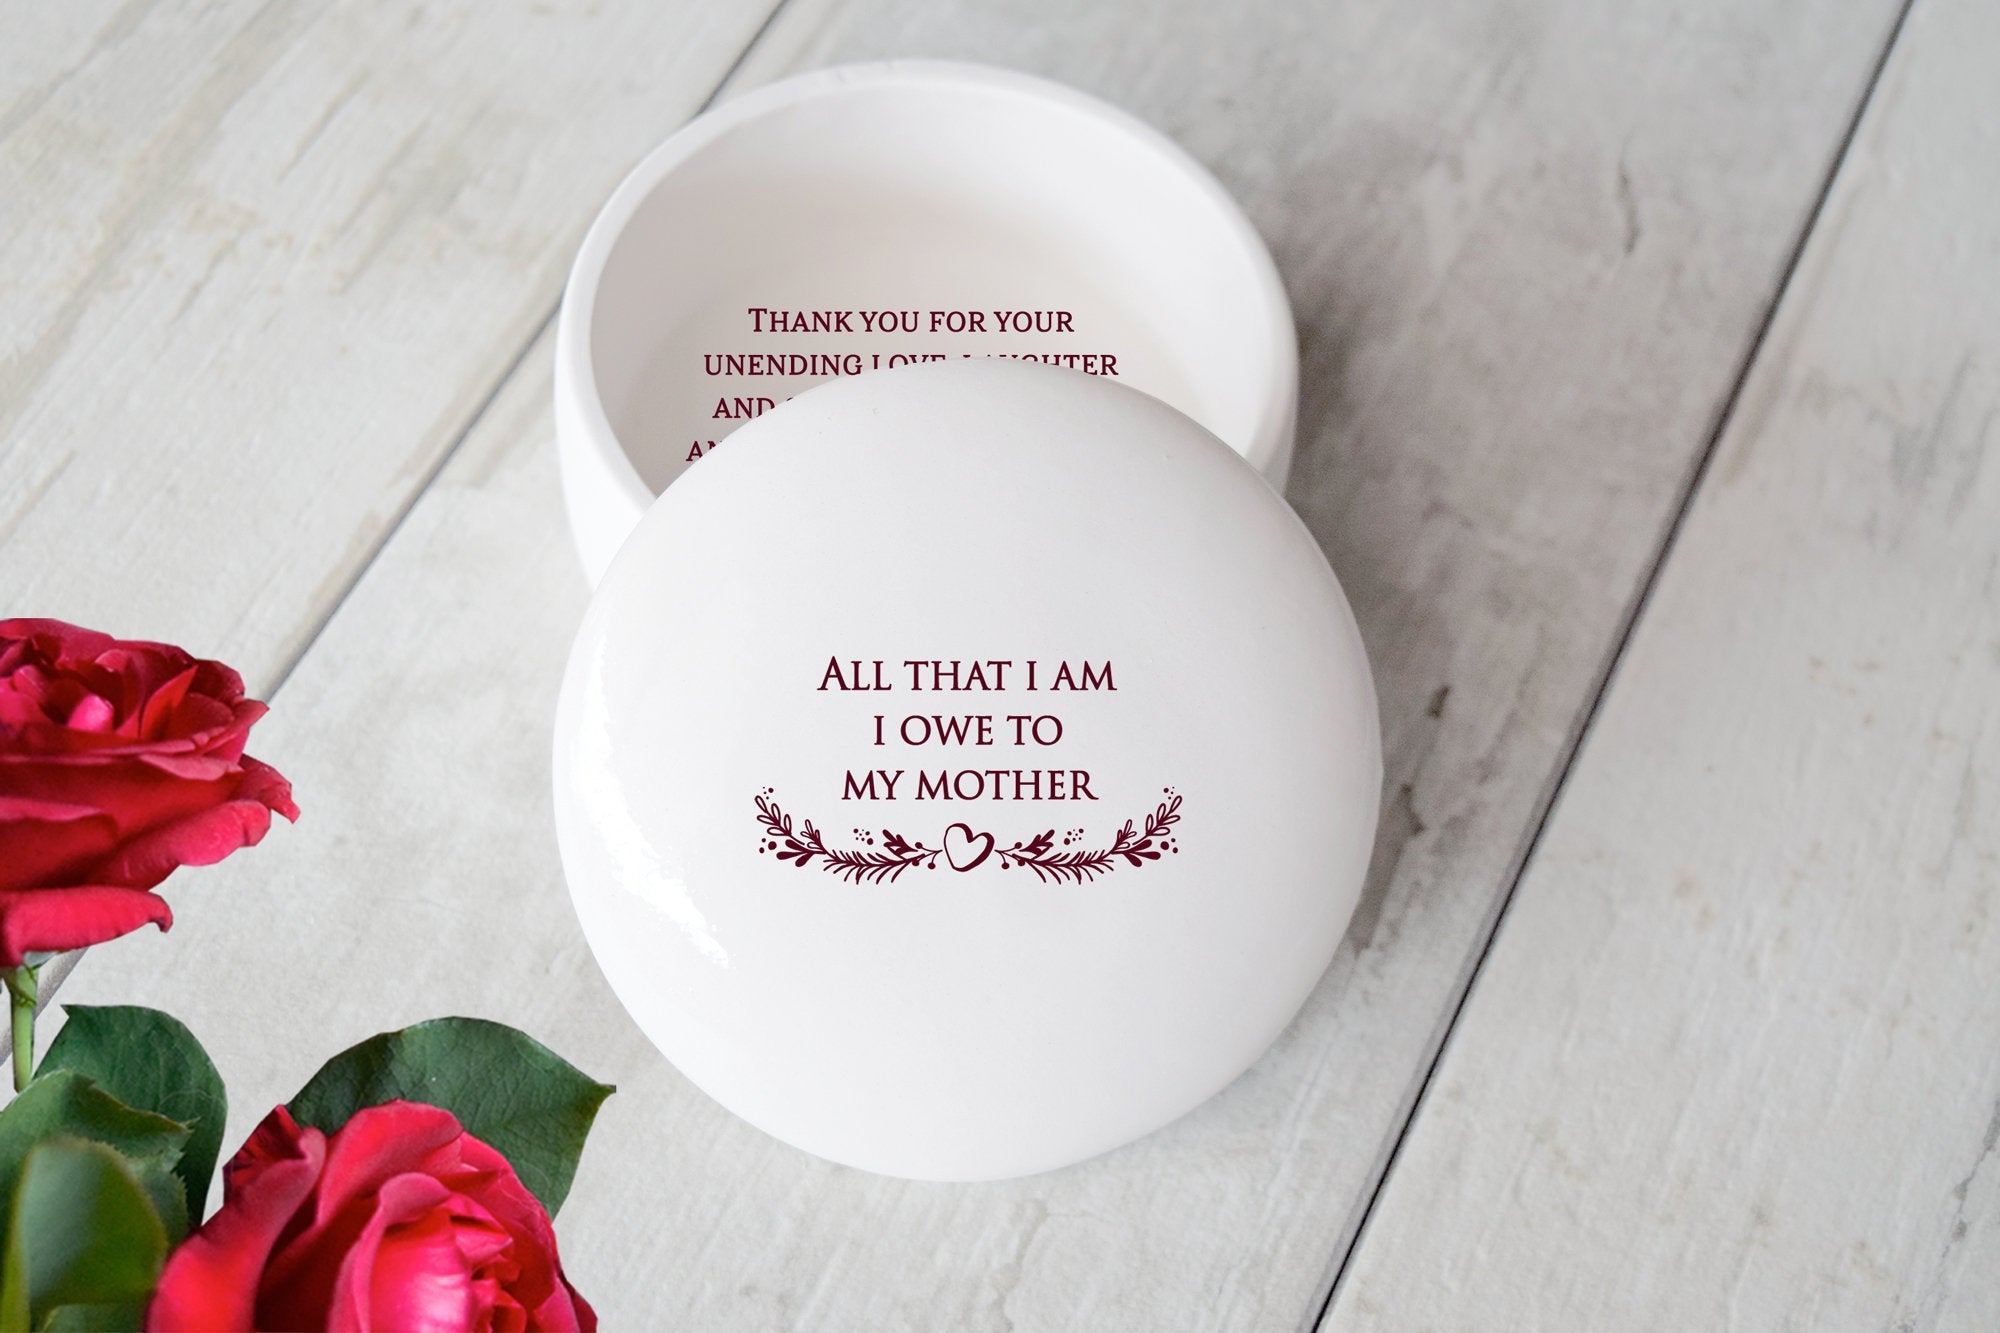 Happy Mothers day Gift ideas for mom Personalized gifts for mom – Ceramics  By Orly